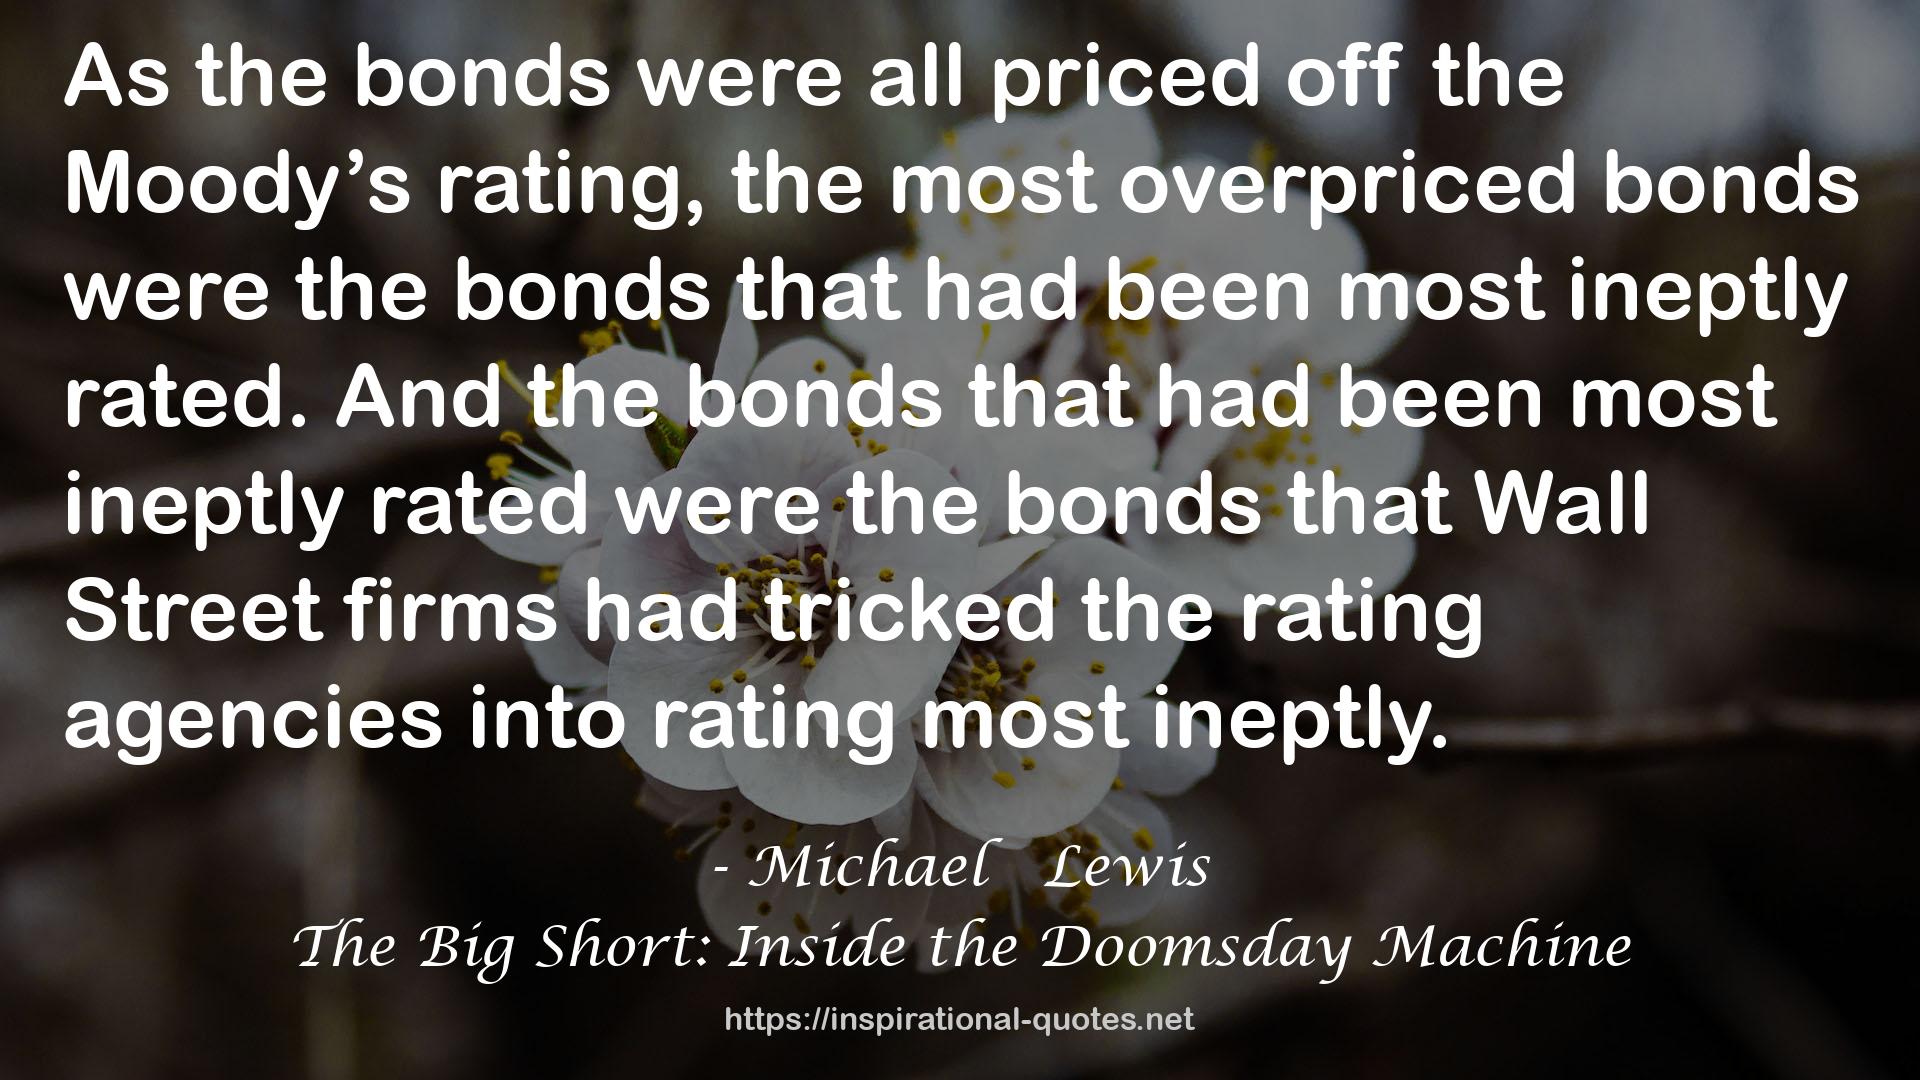 The Big Short: Inside the Doomsday Machine QUOTES